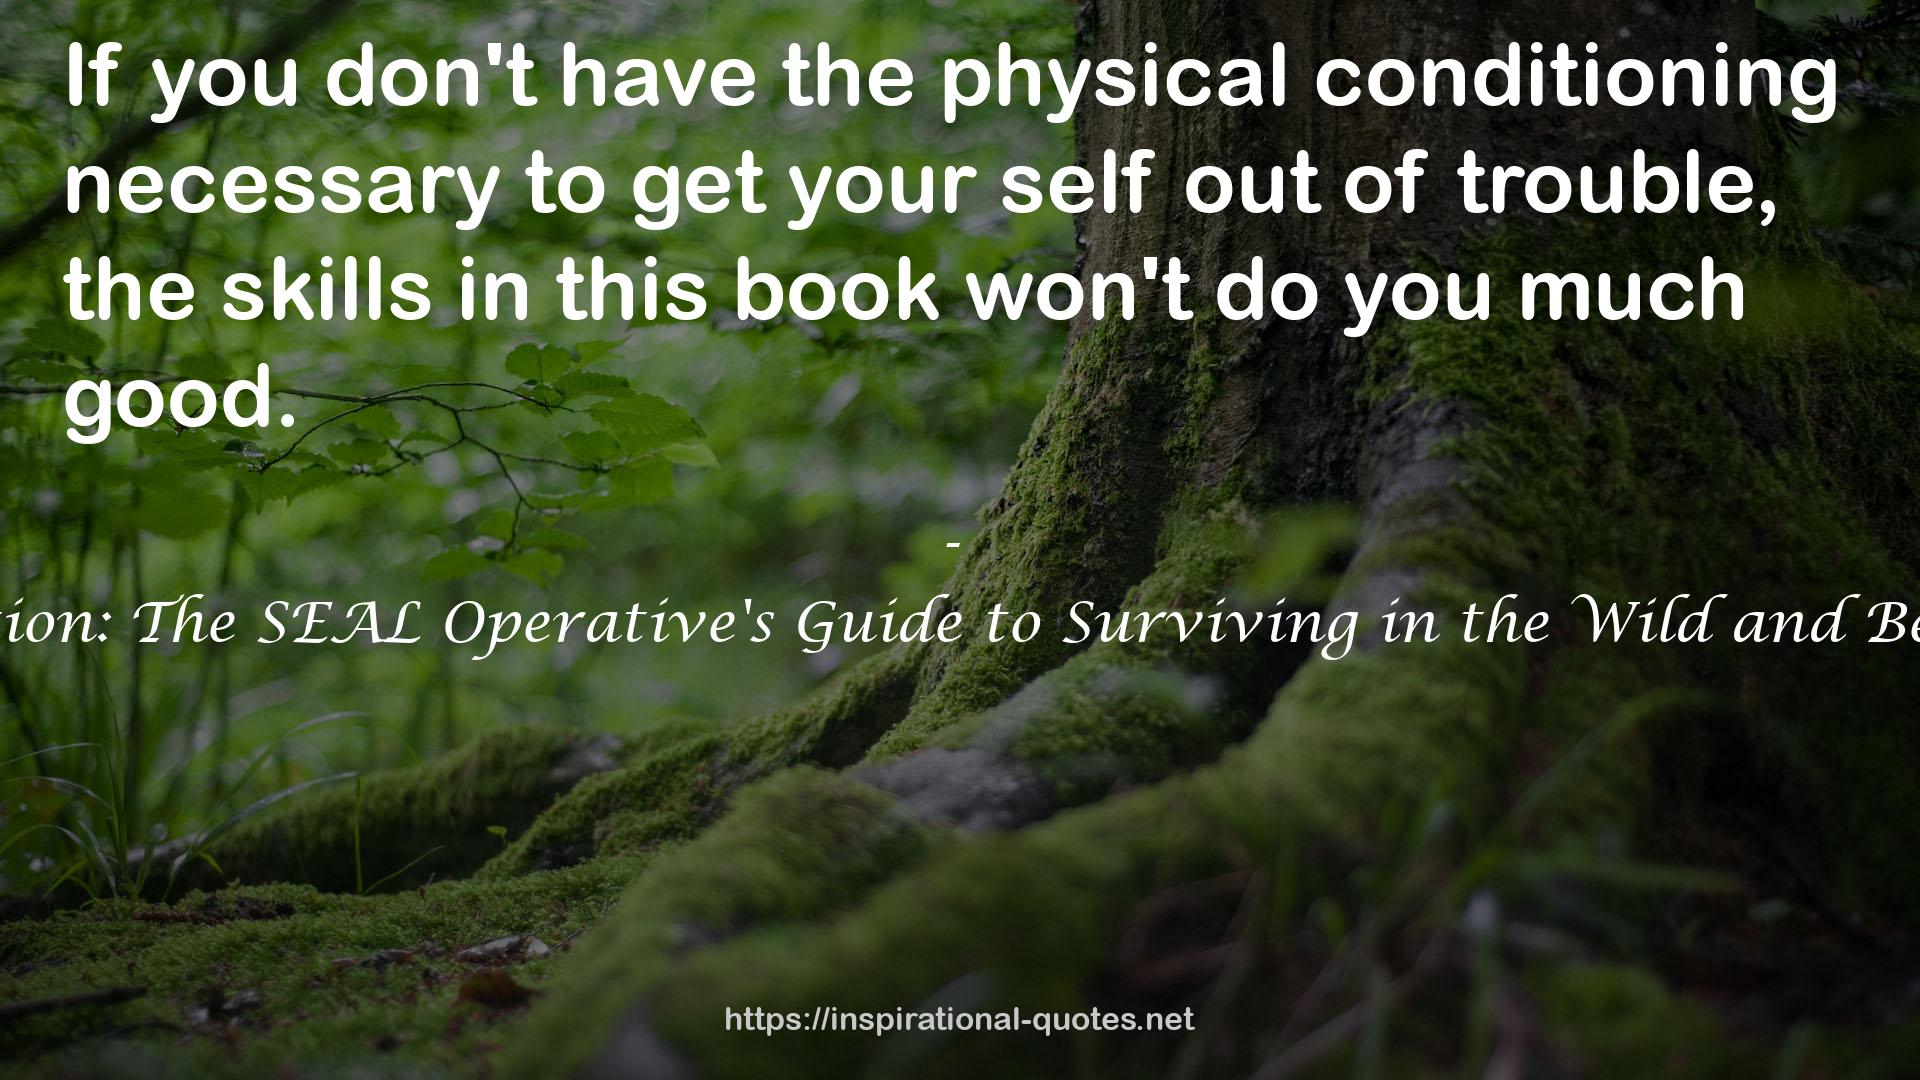 100 Deadly Skills: Survival Edition: The SEAL Operative's Guide to Surviving in the Wild and Being Prepared for Any Disaster QUOTES